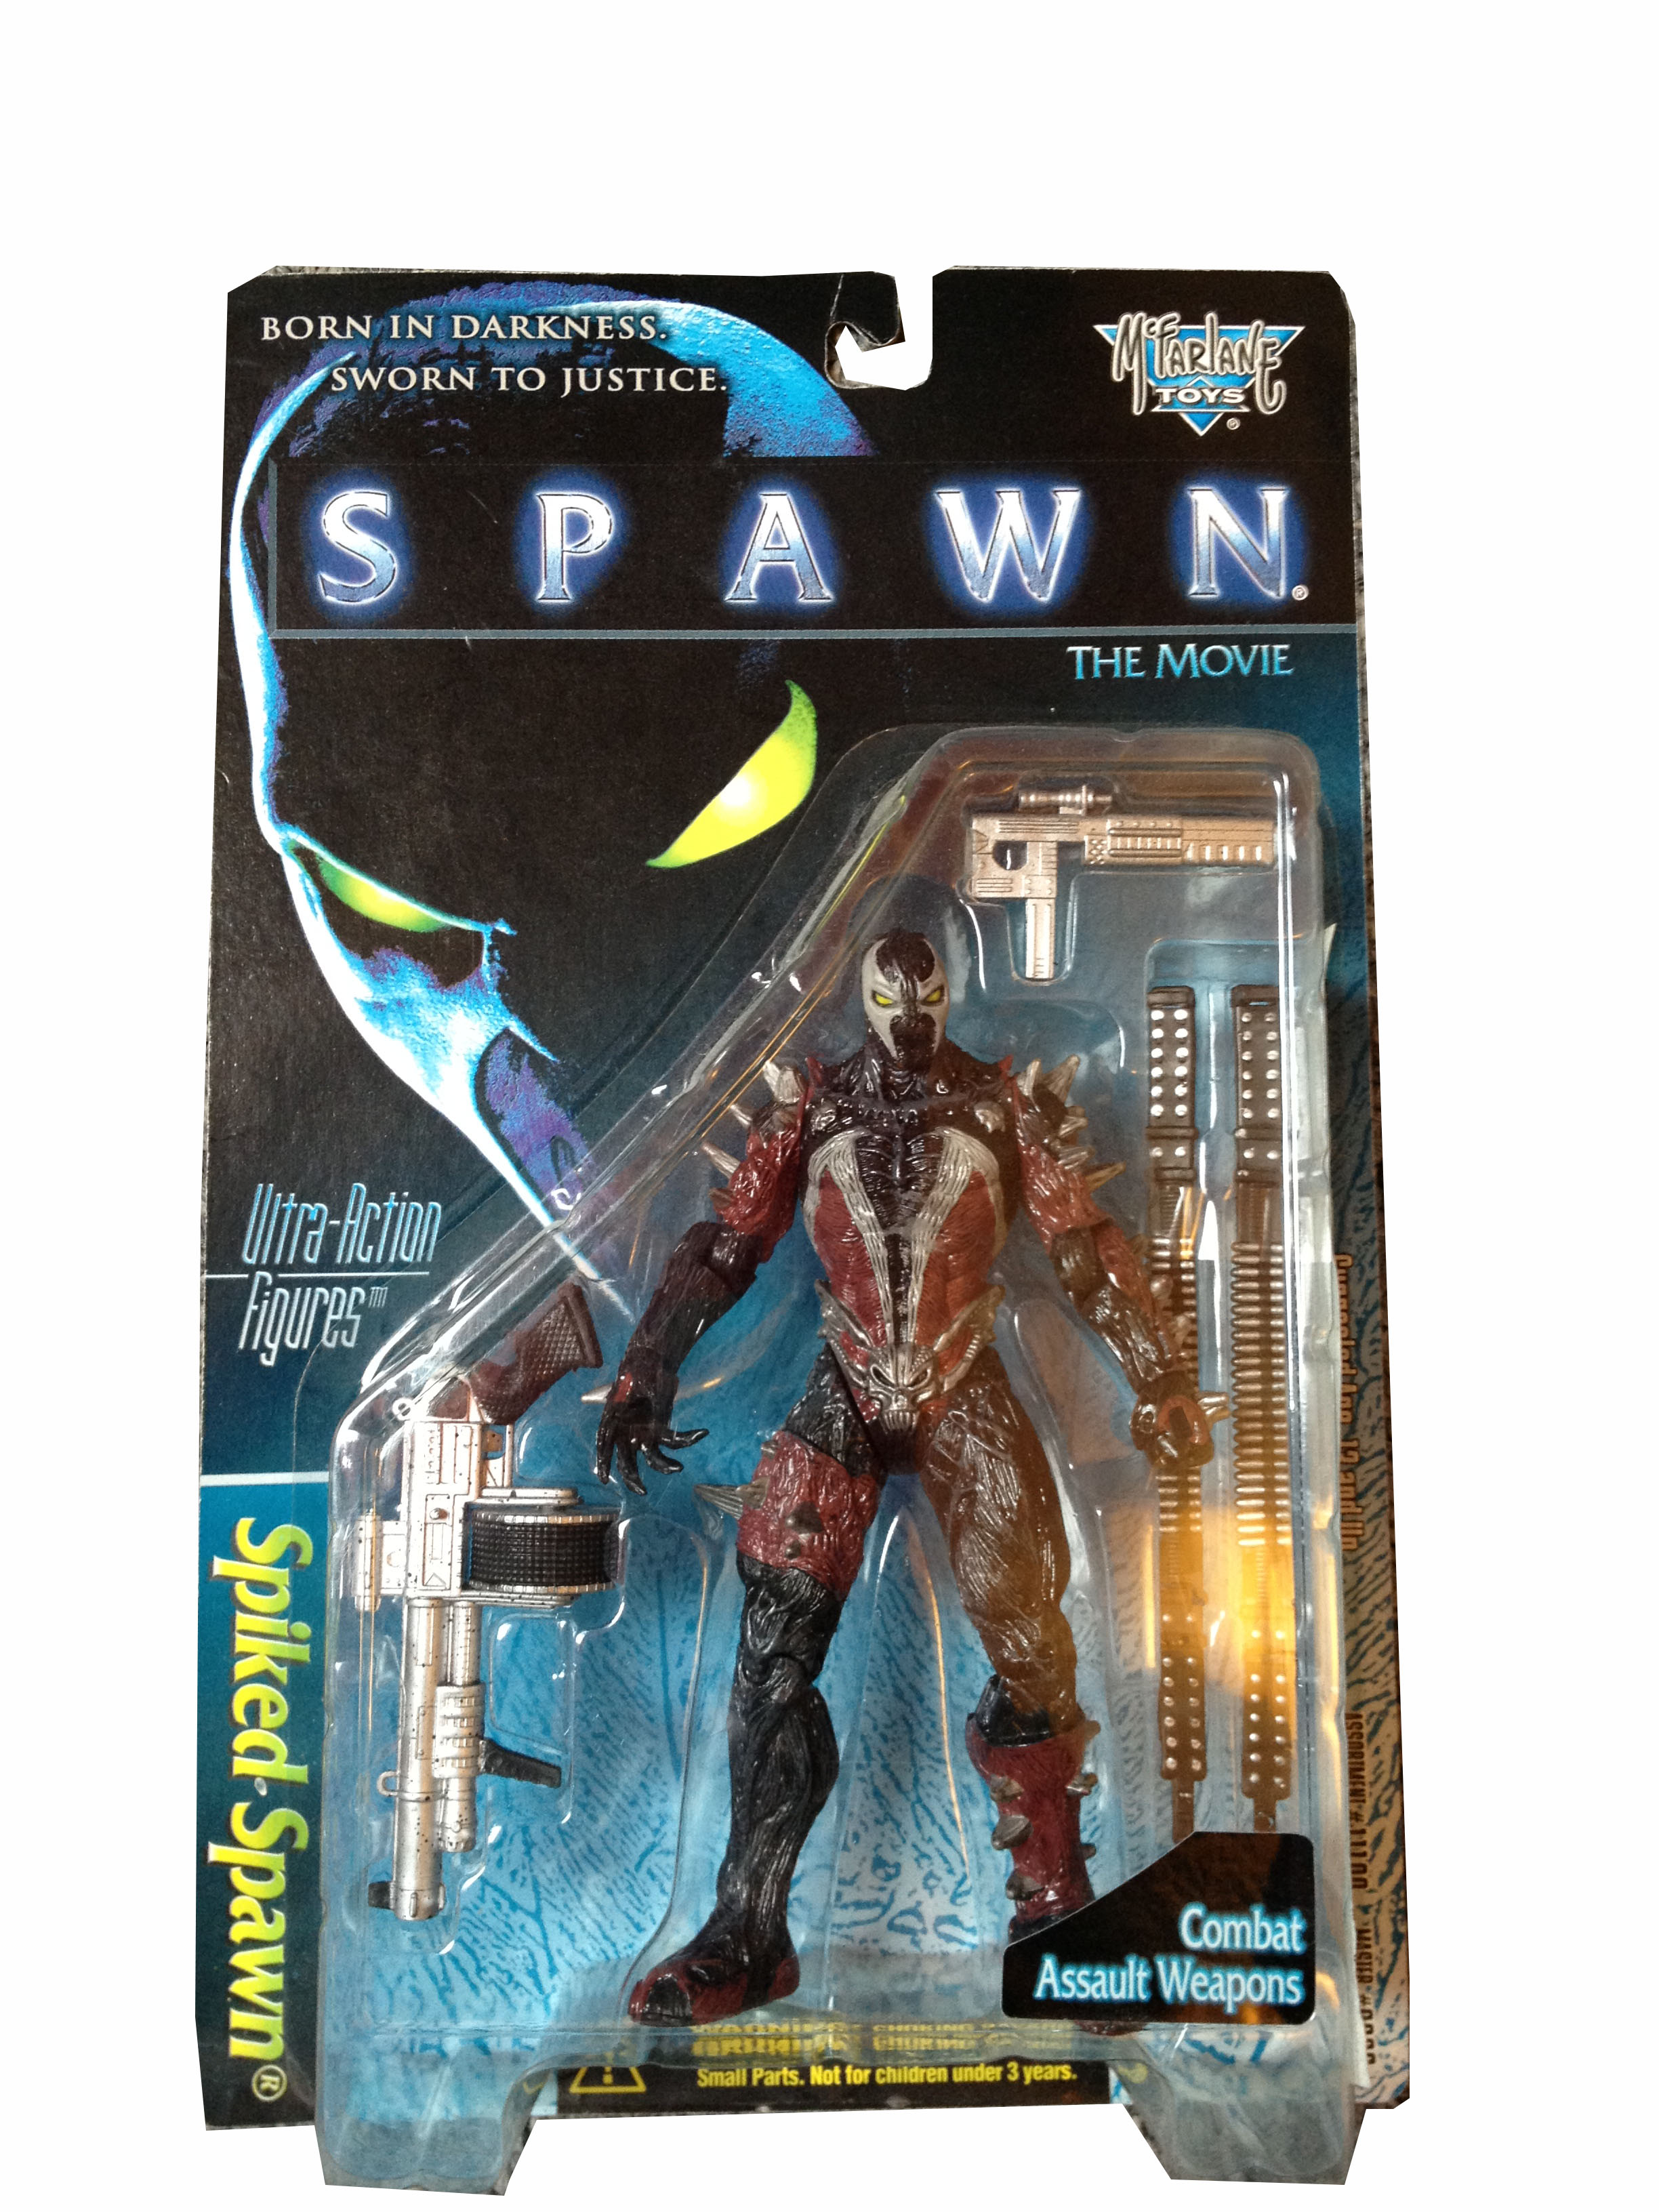 spiked spawn